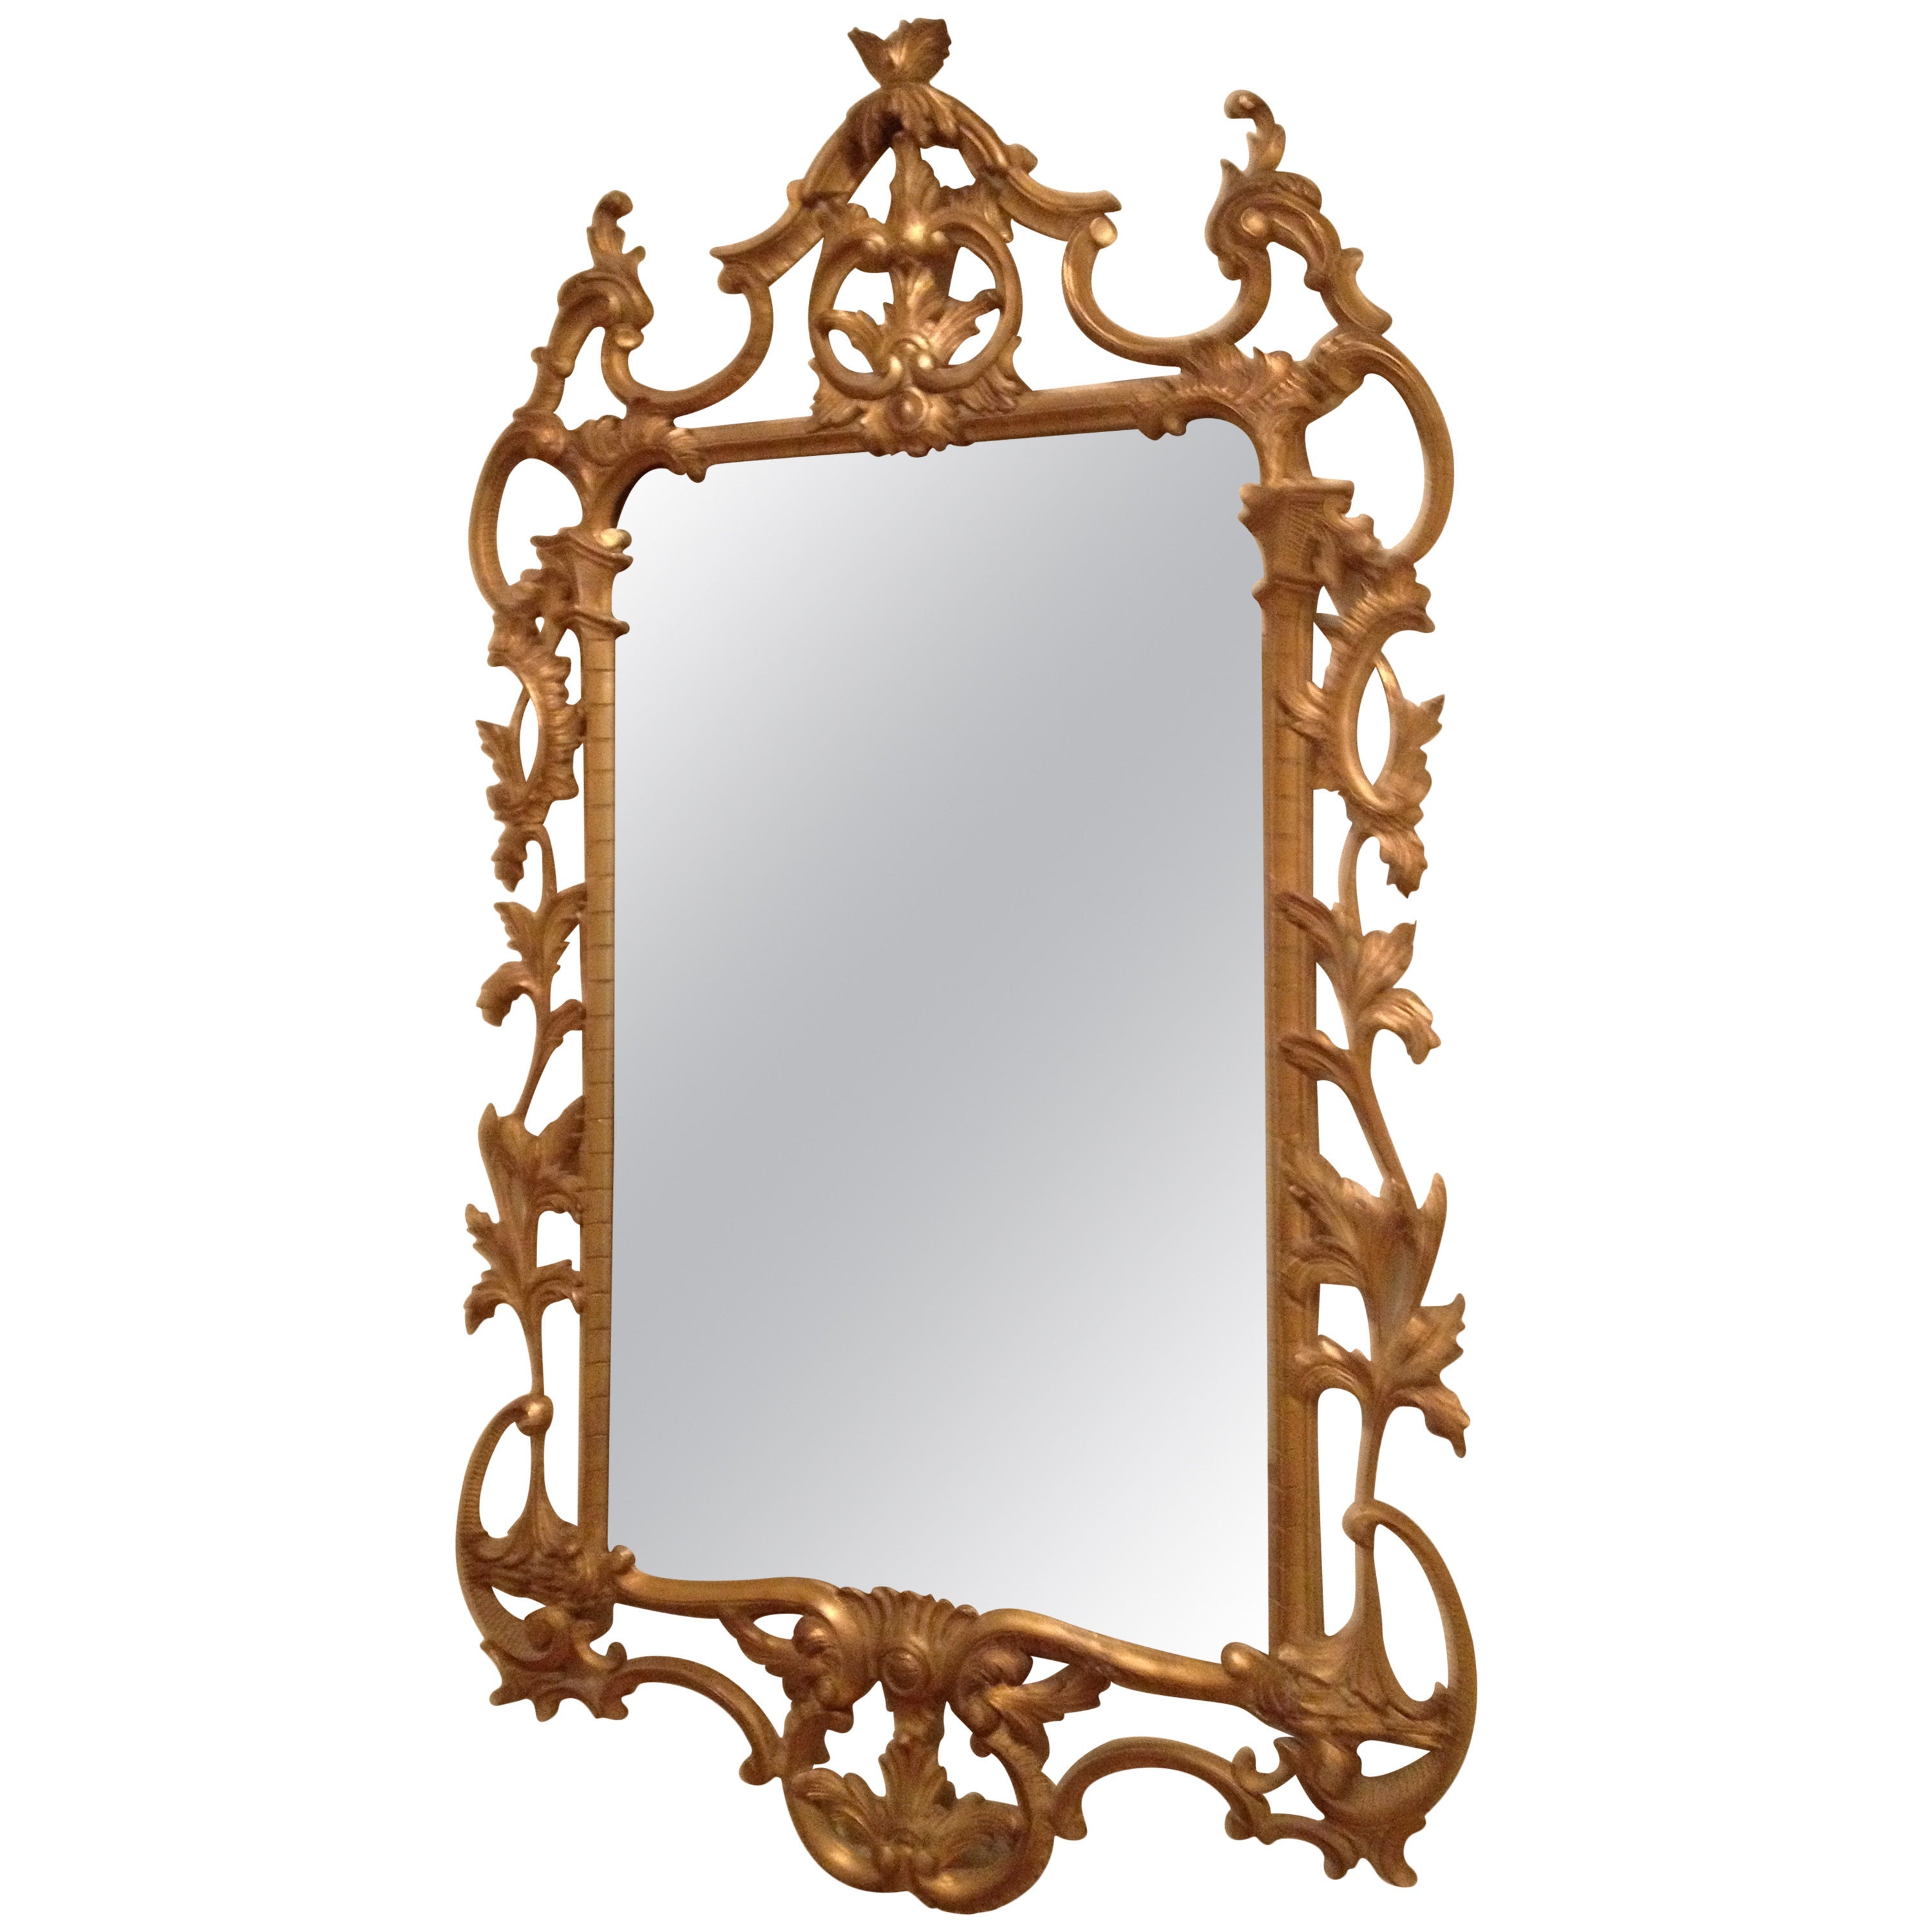 Giltwood Mirror by Carvers' Guild